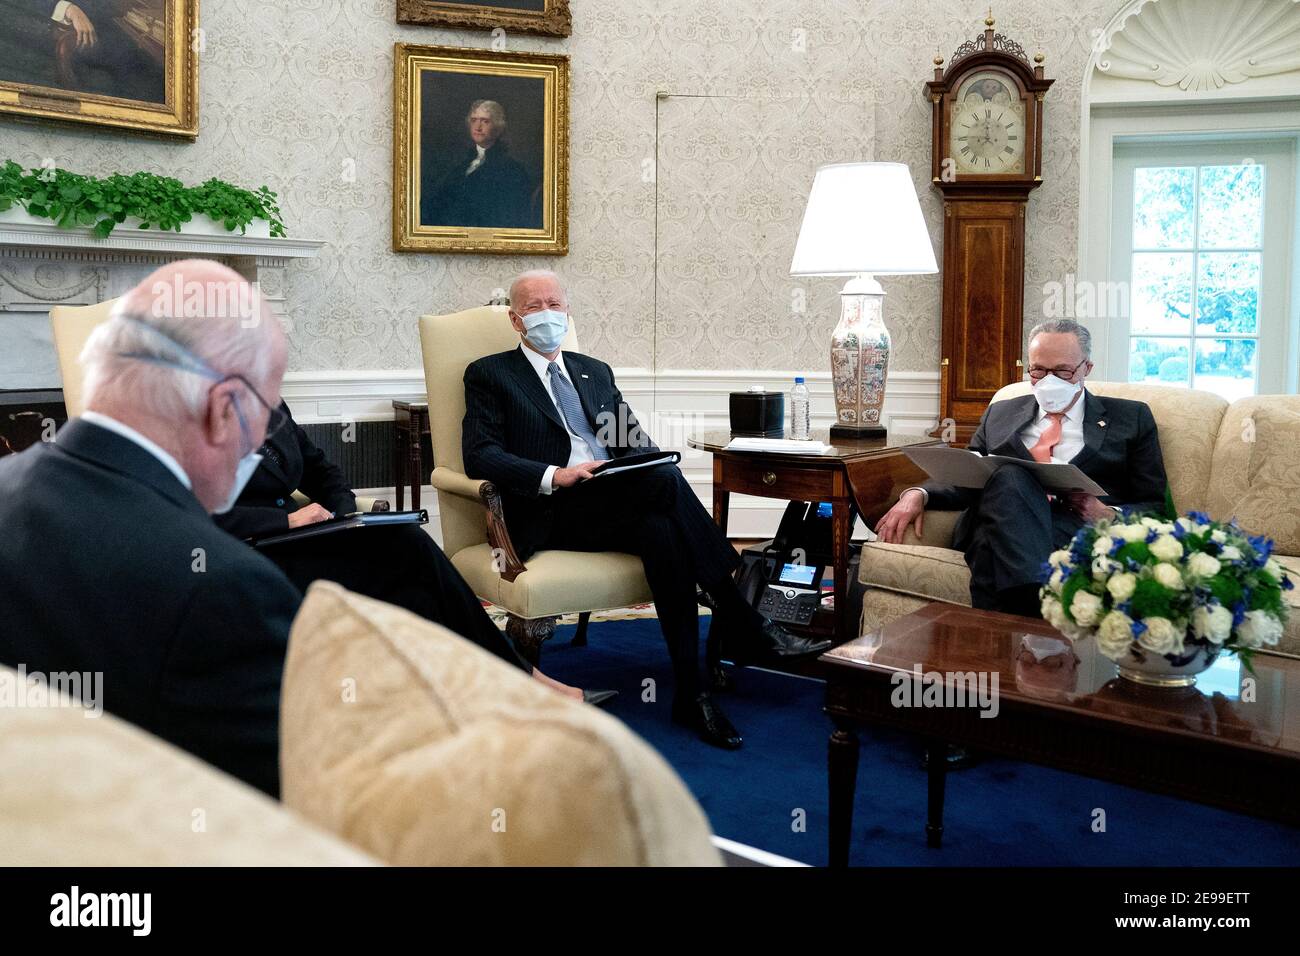 President Joe Biden, center, wears a protective mask while meeting with U.S. Vice President Kamala Harris, not pictured, Senate Majority Leader Chuck Schumer (D-N.Y.), right, and fellow Democratic Senators to discuss the American Rescue Plan in the Oval Office of the White House in Washington on Wednesday, February 3, 2021. Credit: Stefani Reynolds/Pool via CNP /MediaPunch Stock Photo